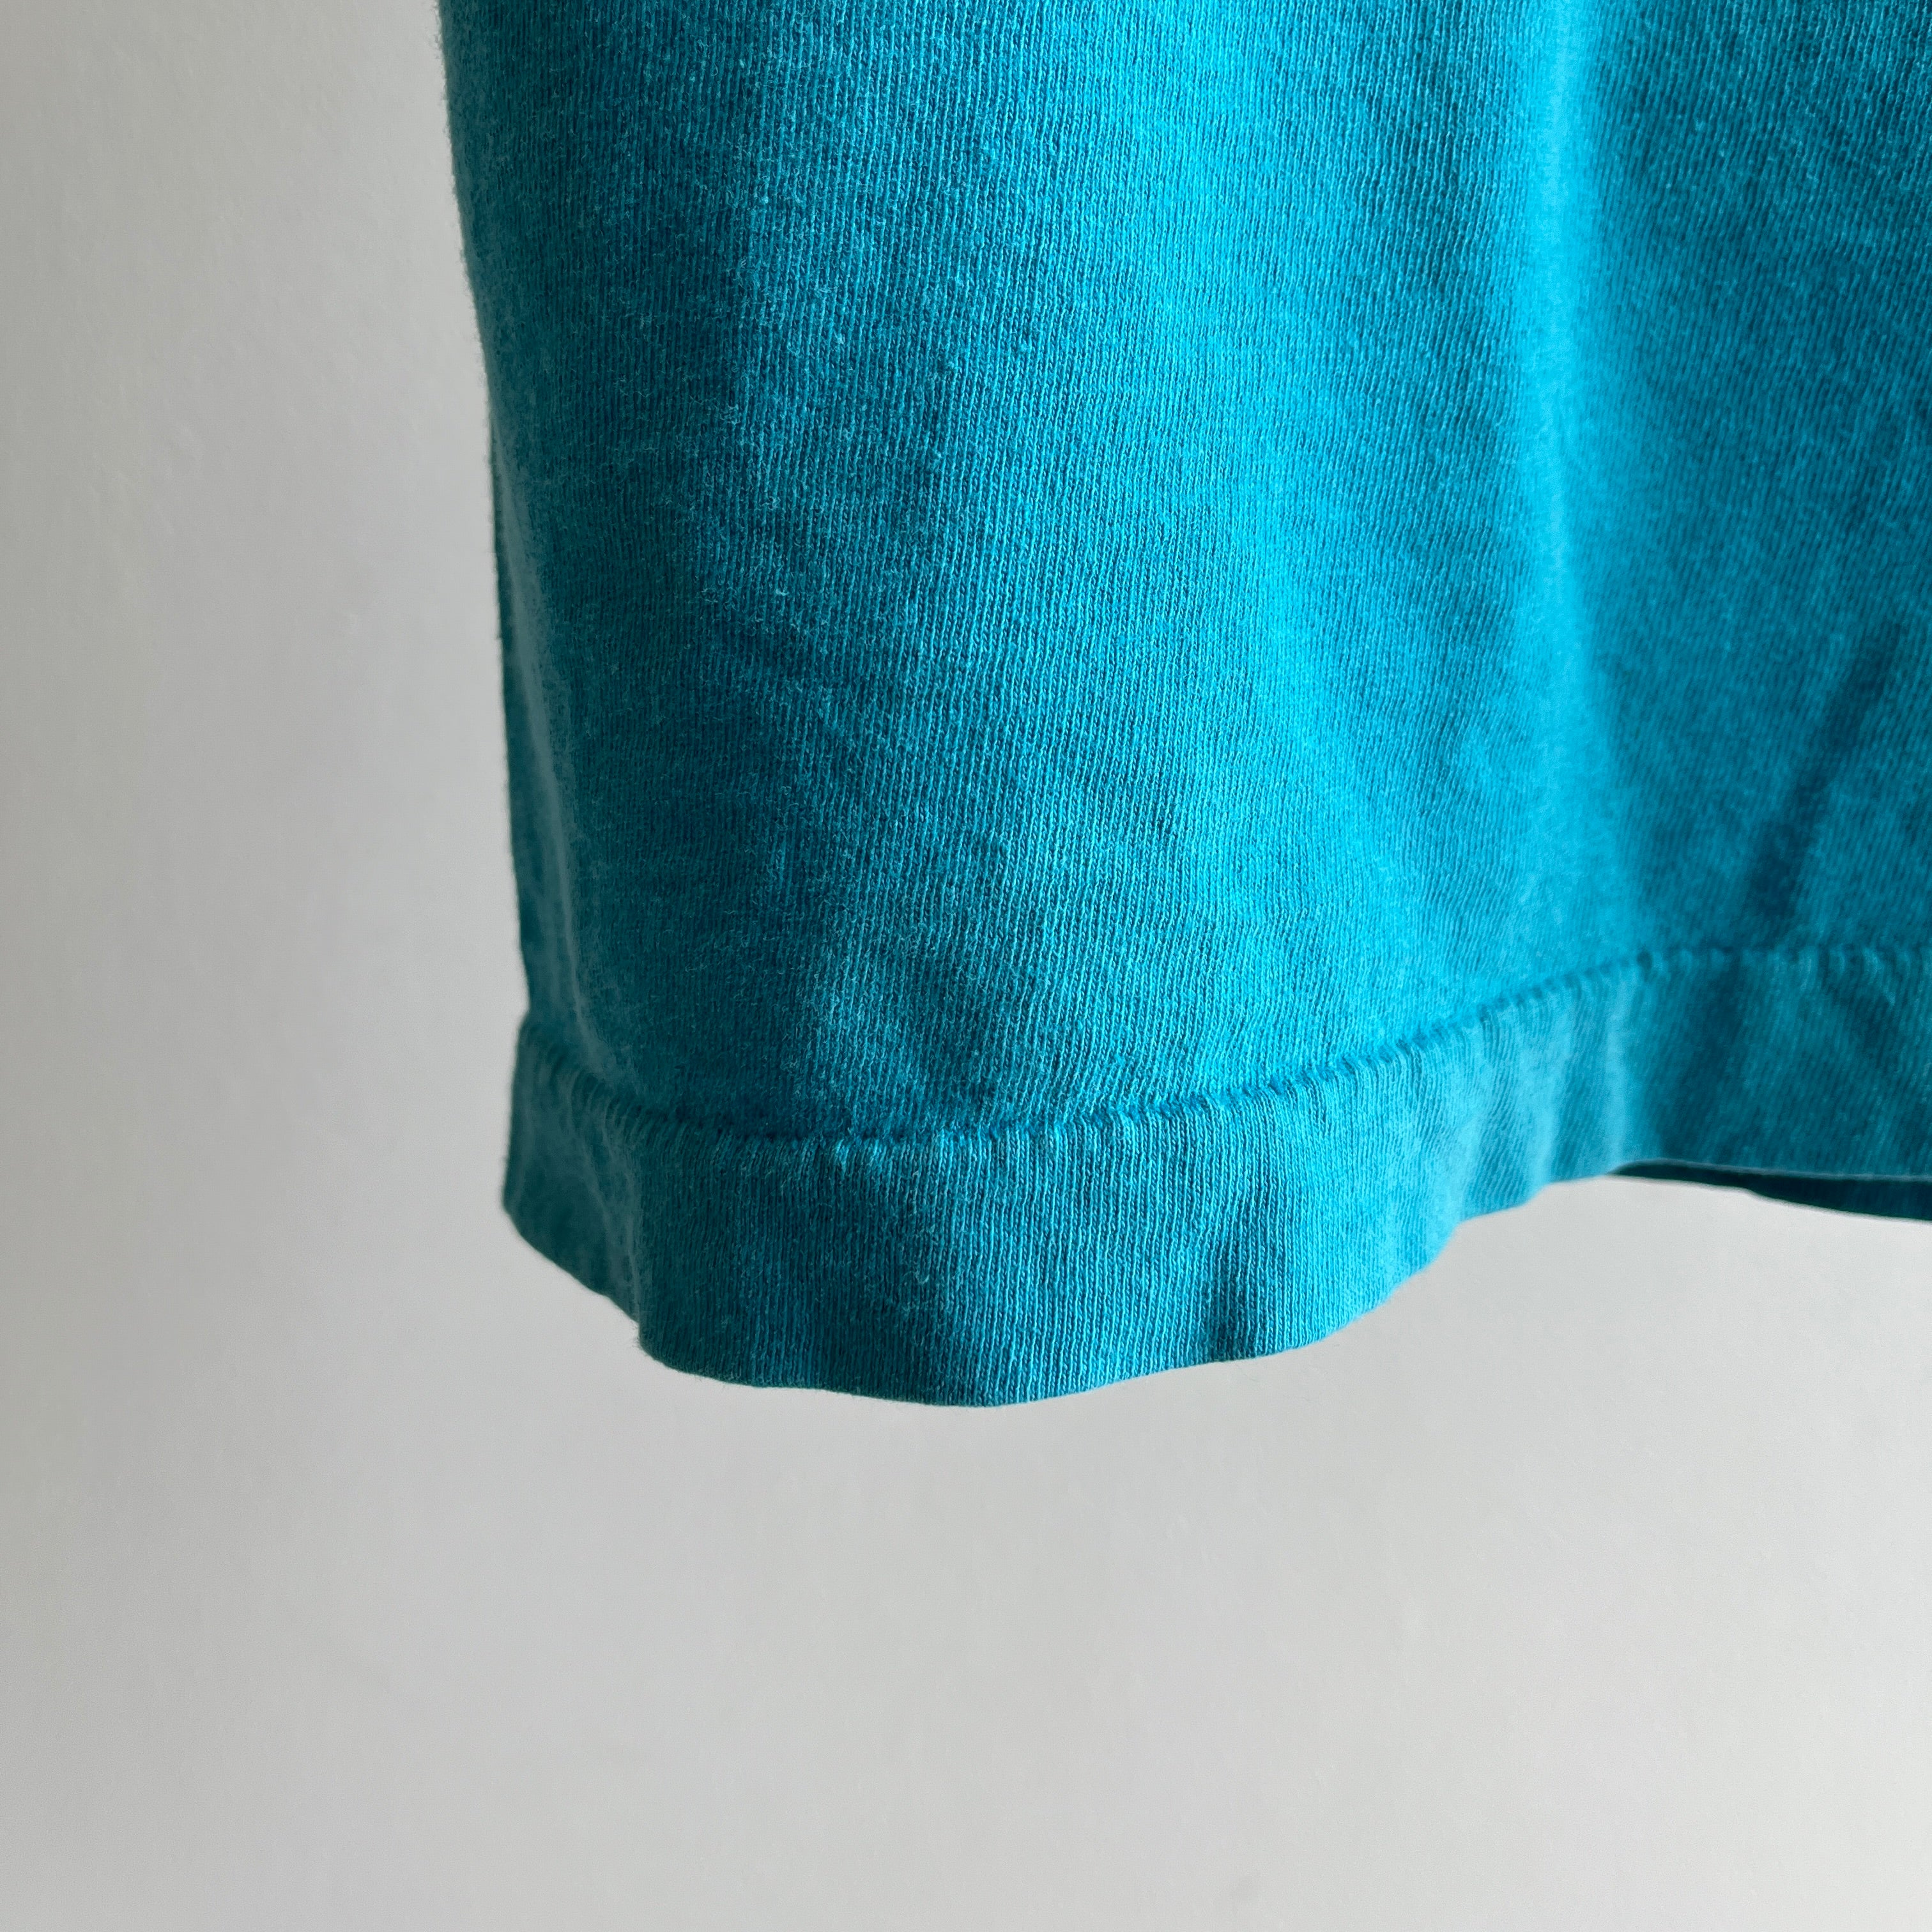 1980s Soft Beat Up Stained and Delightful FOTL Blank Teal Pocket T-Shirt - THIS IS GREAT!!